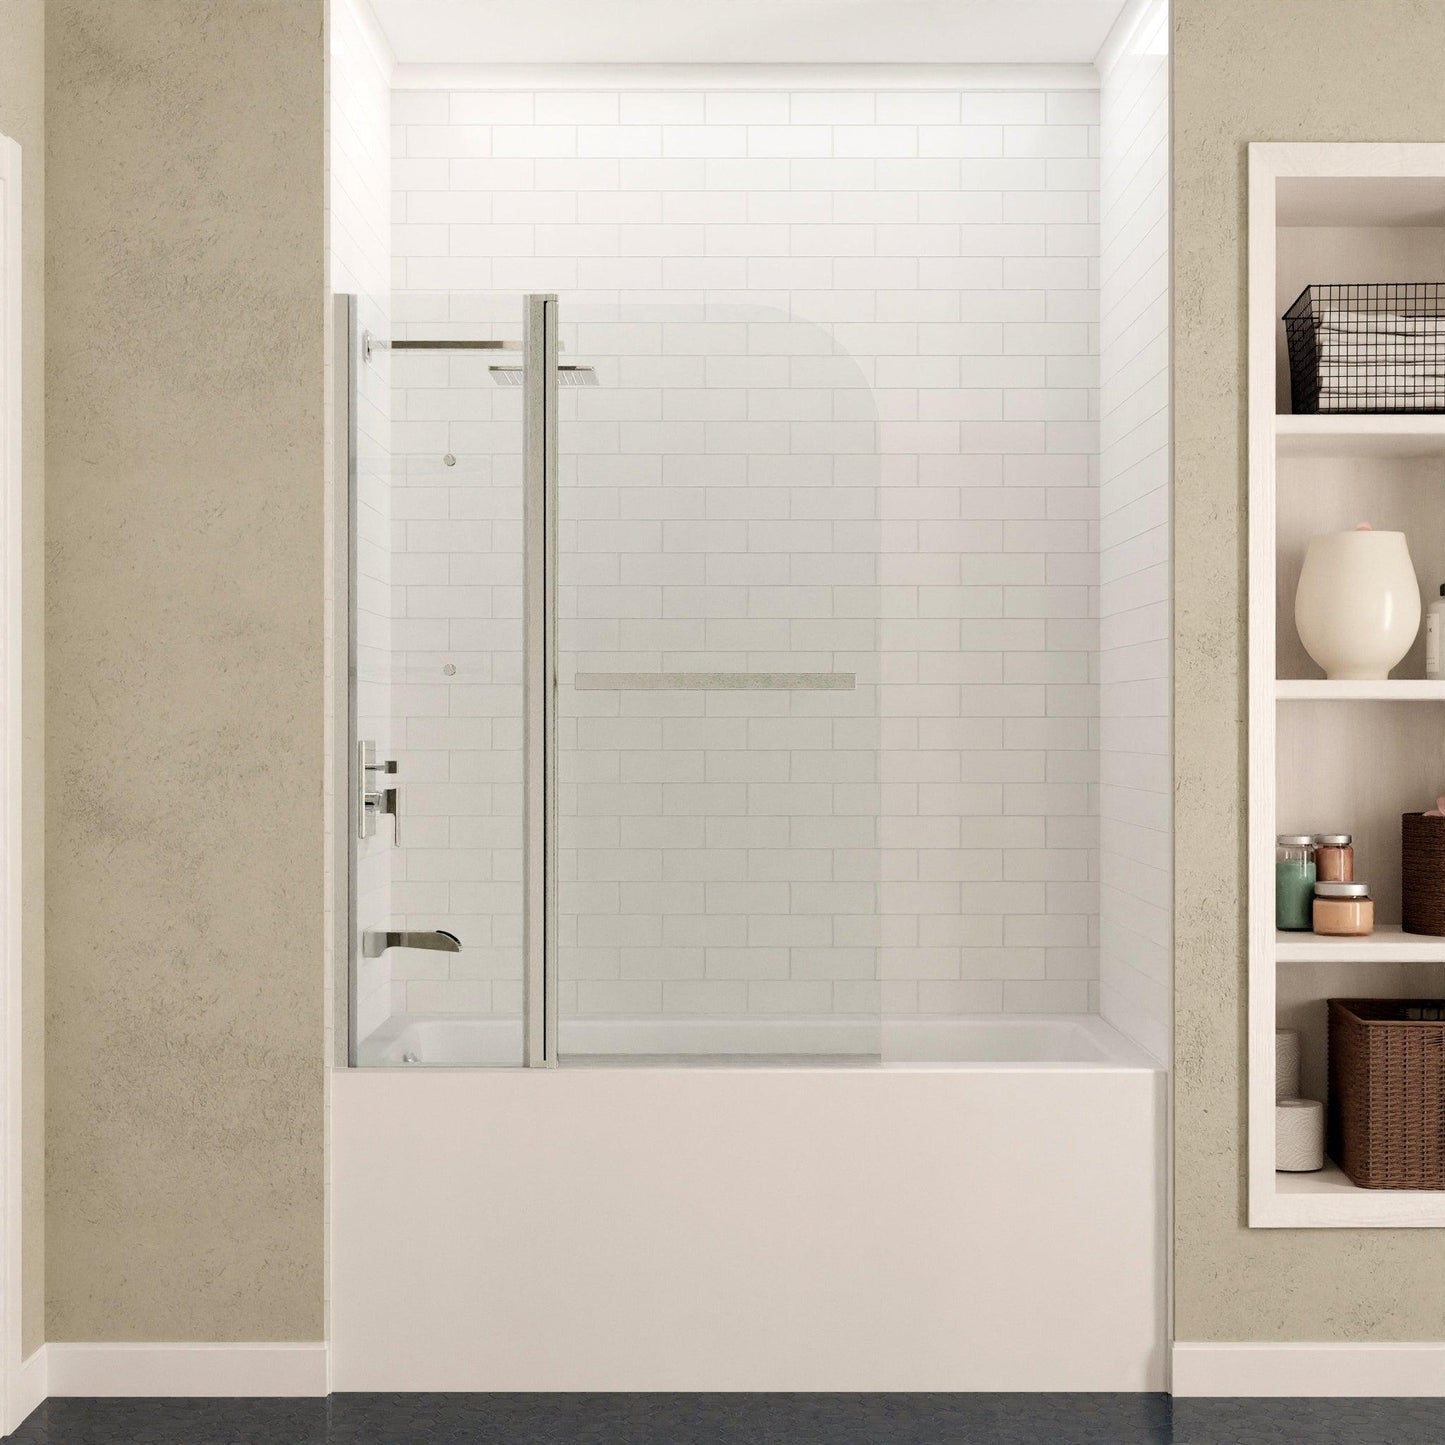 ANZZI Galleon Series White "60 x 32" Alcove Left Drain Rectangular Bathtub With Built-In Flange and Frameless Brushed Nickel Hinged Door